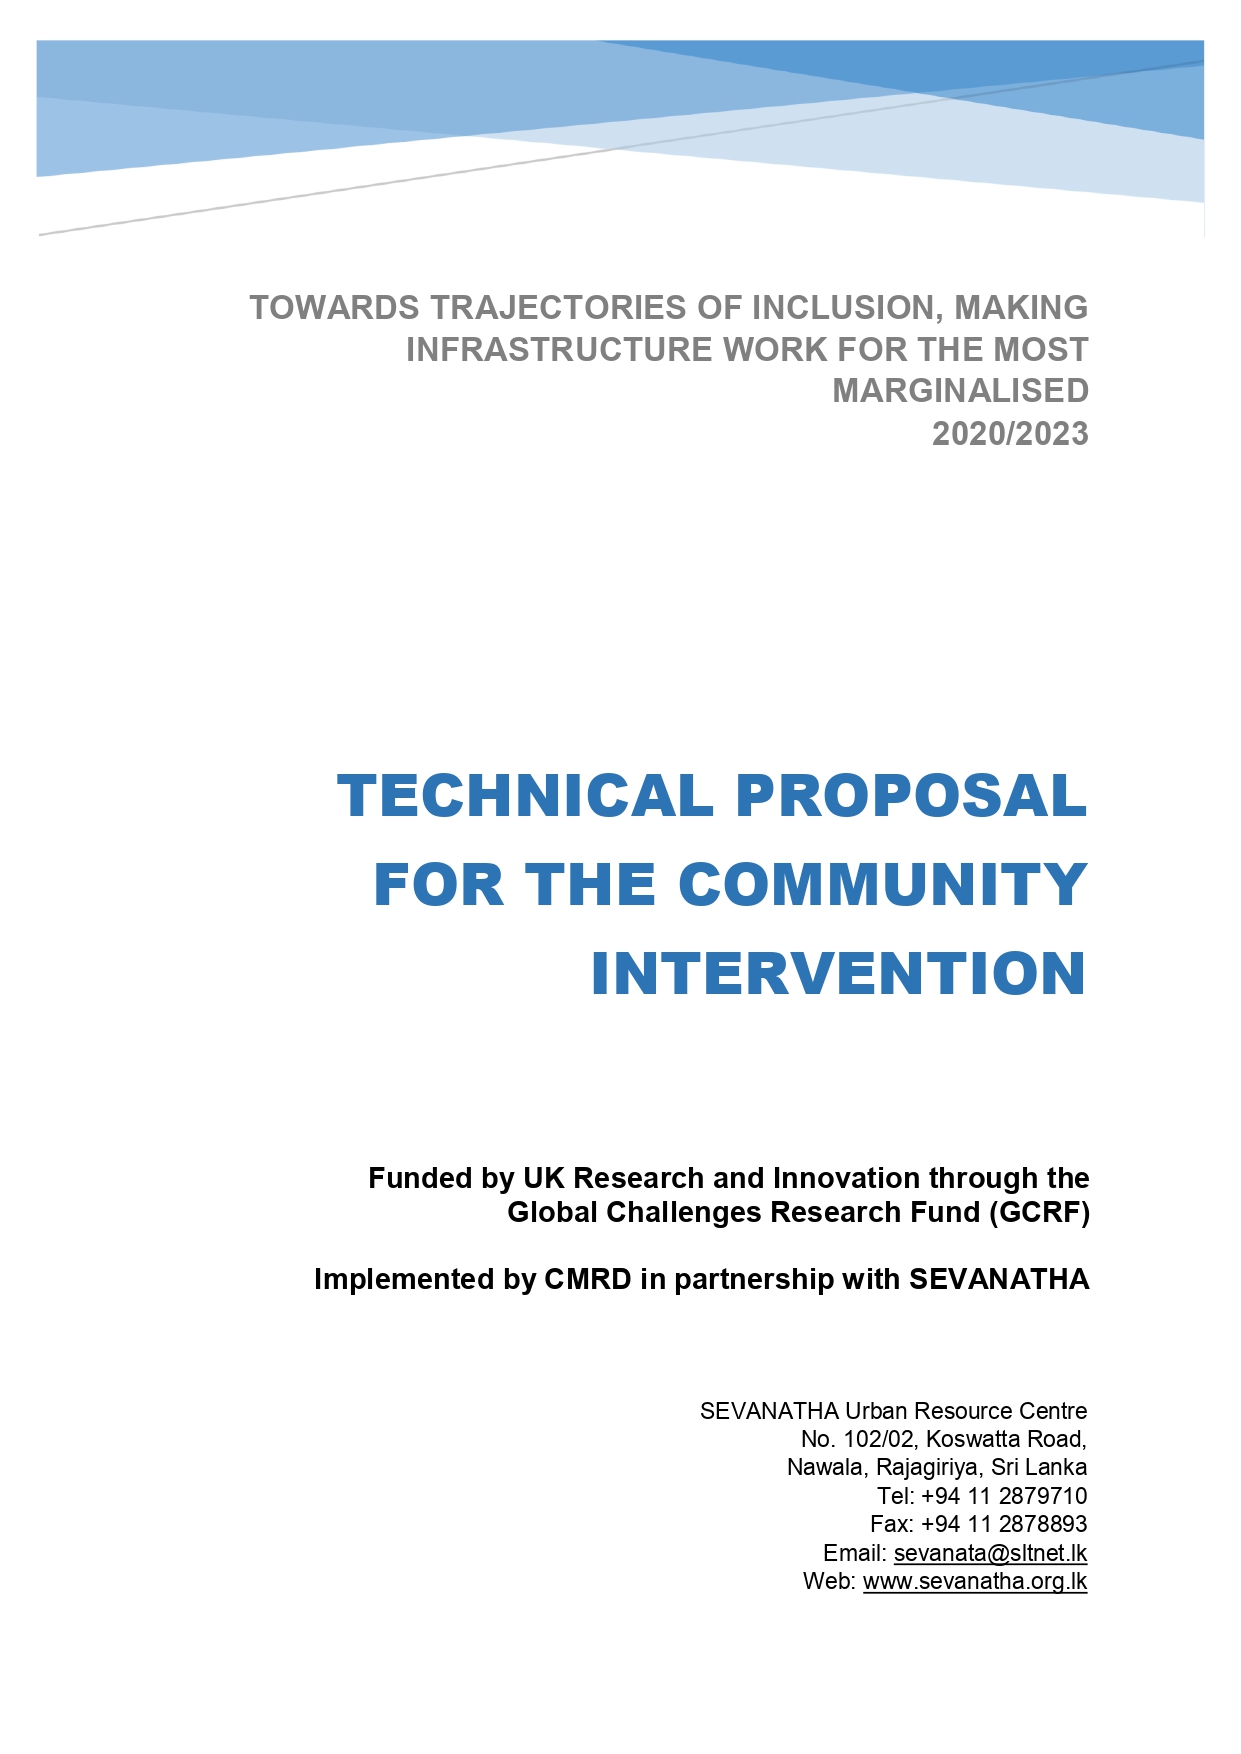 Technical Proposal for the Community Intervention